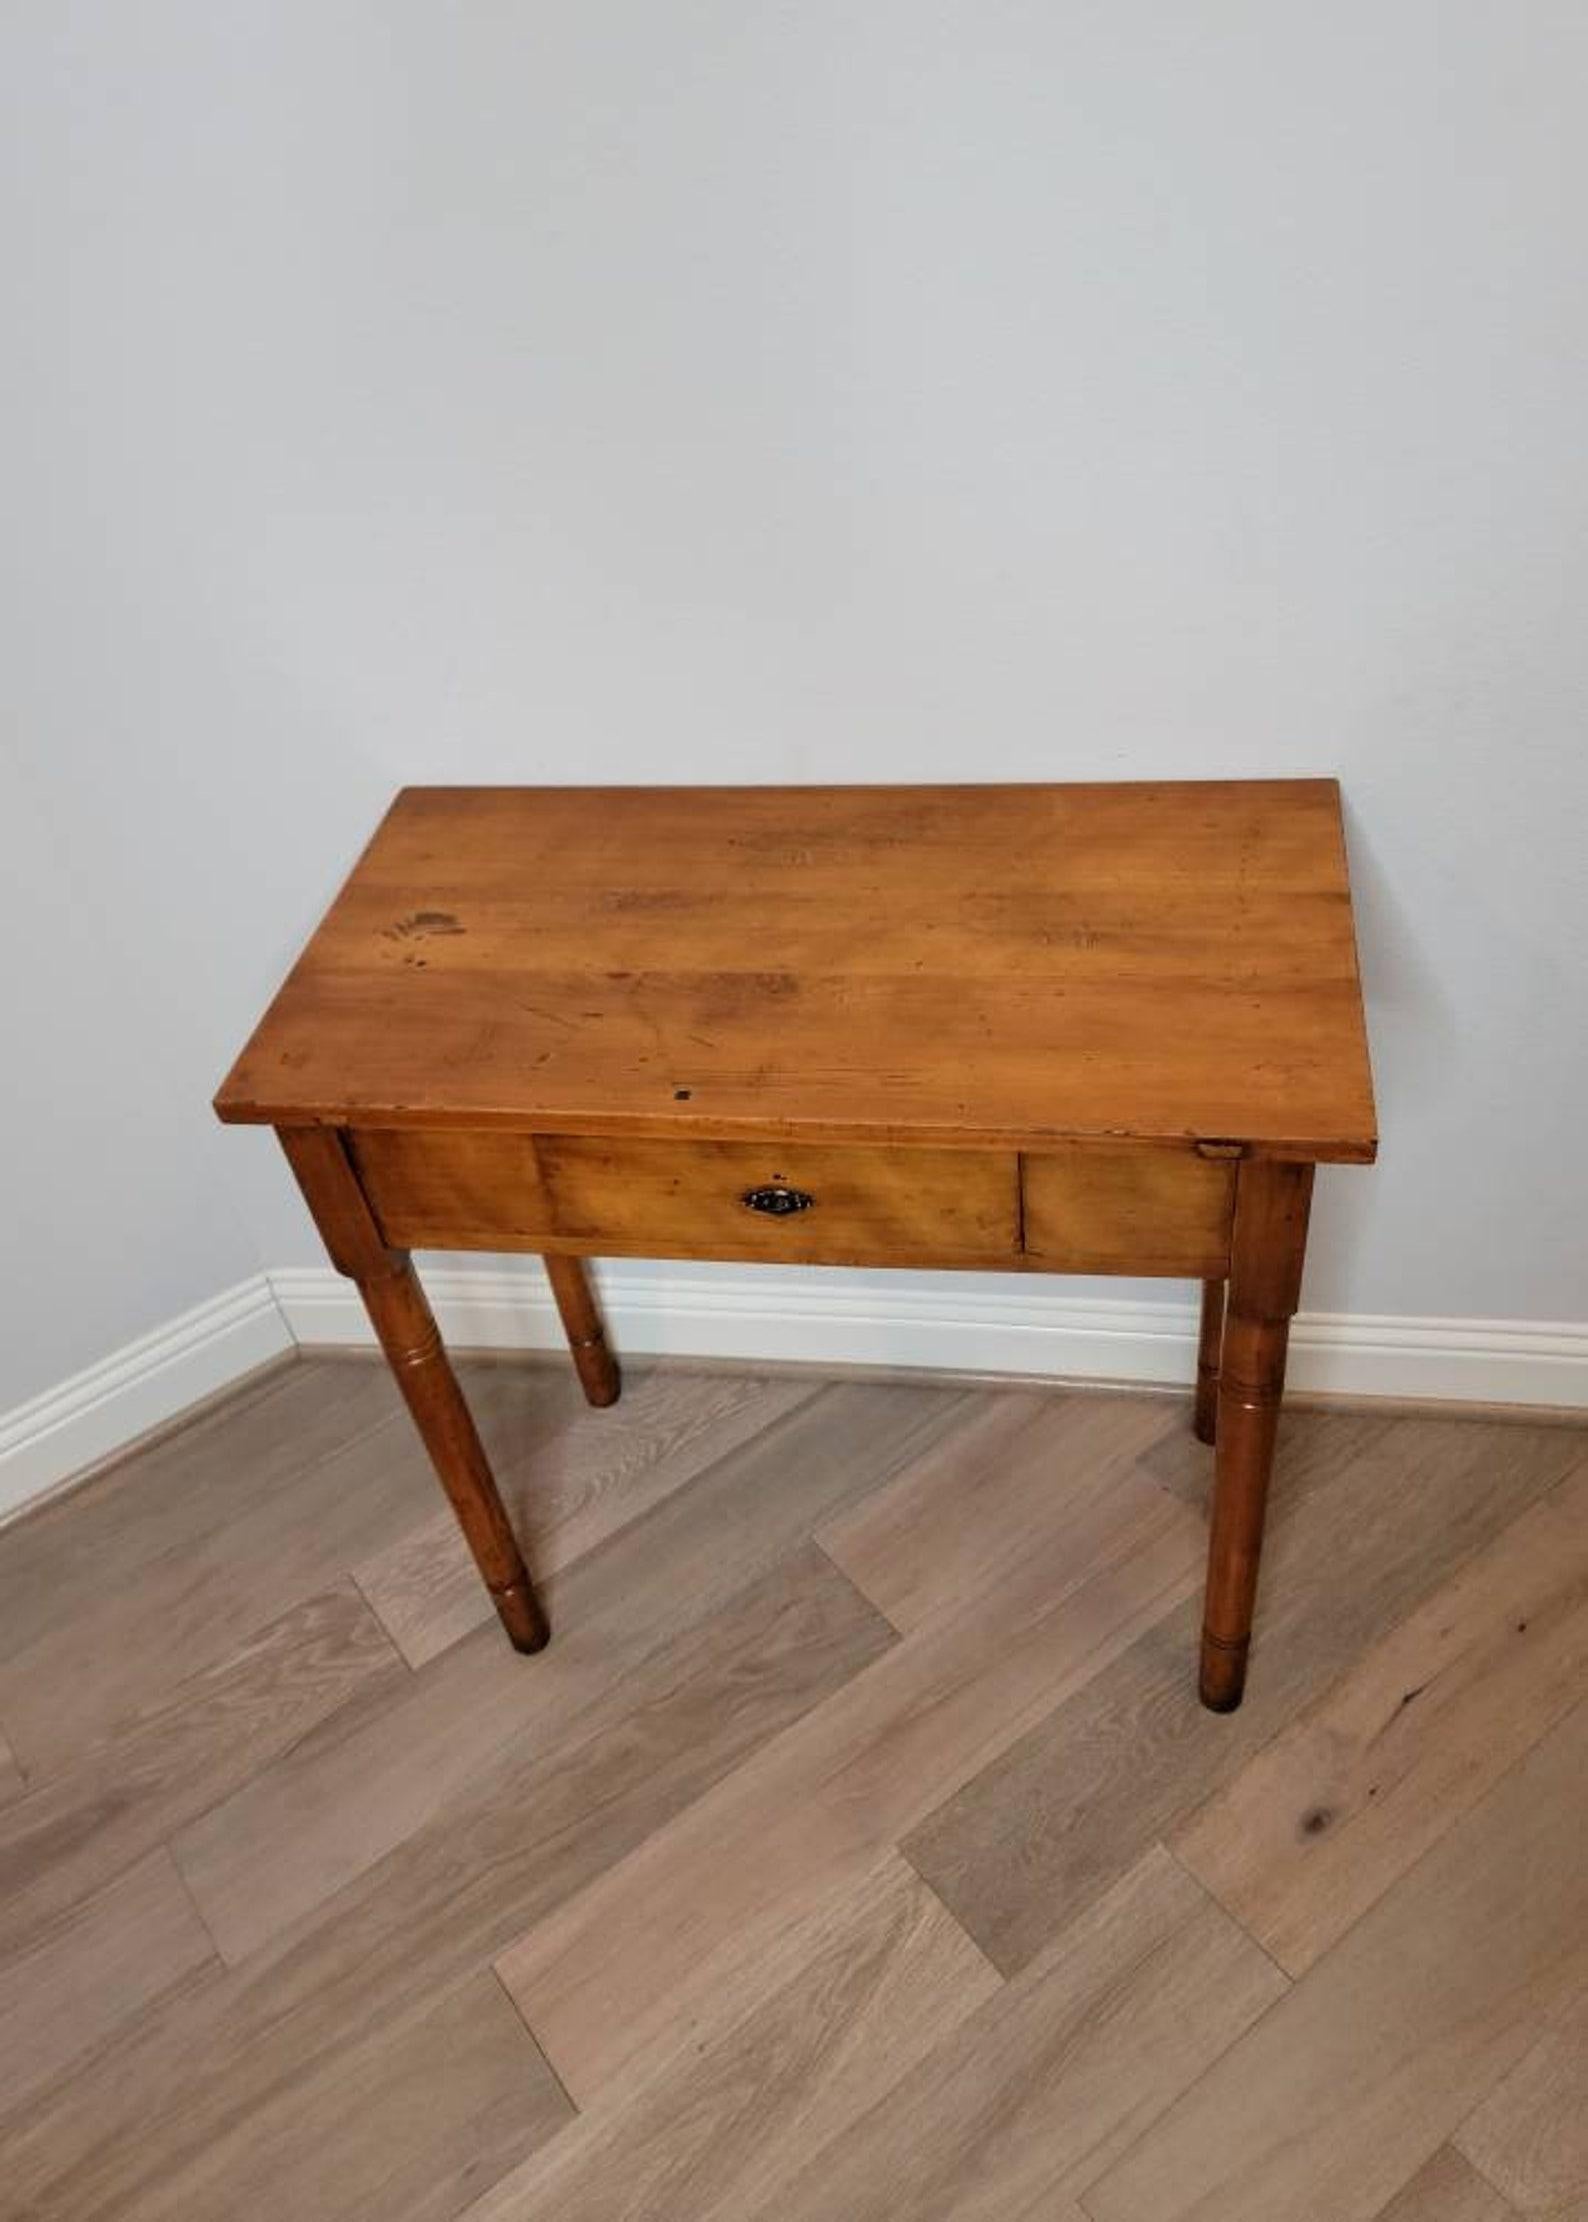 An antique country European farmhouse kitchen work table / writing table with beautiful rich patina. 

Born in the 19th century, hand-crafted of solid pine, the simple form enhanced by complex pine wood grain detail patterns, honey coloring, and